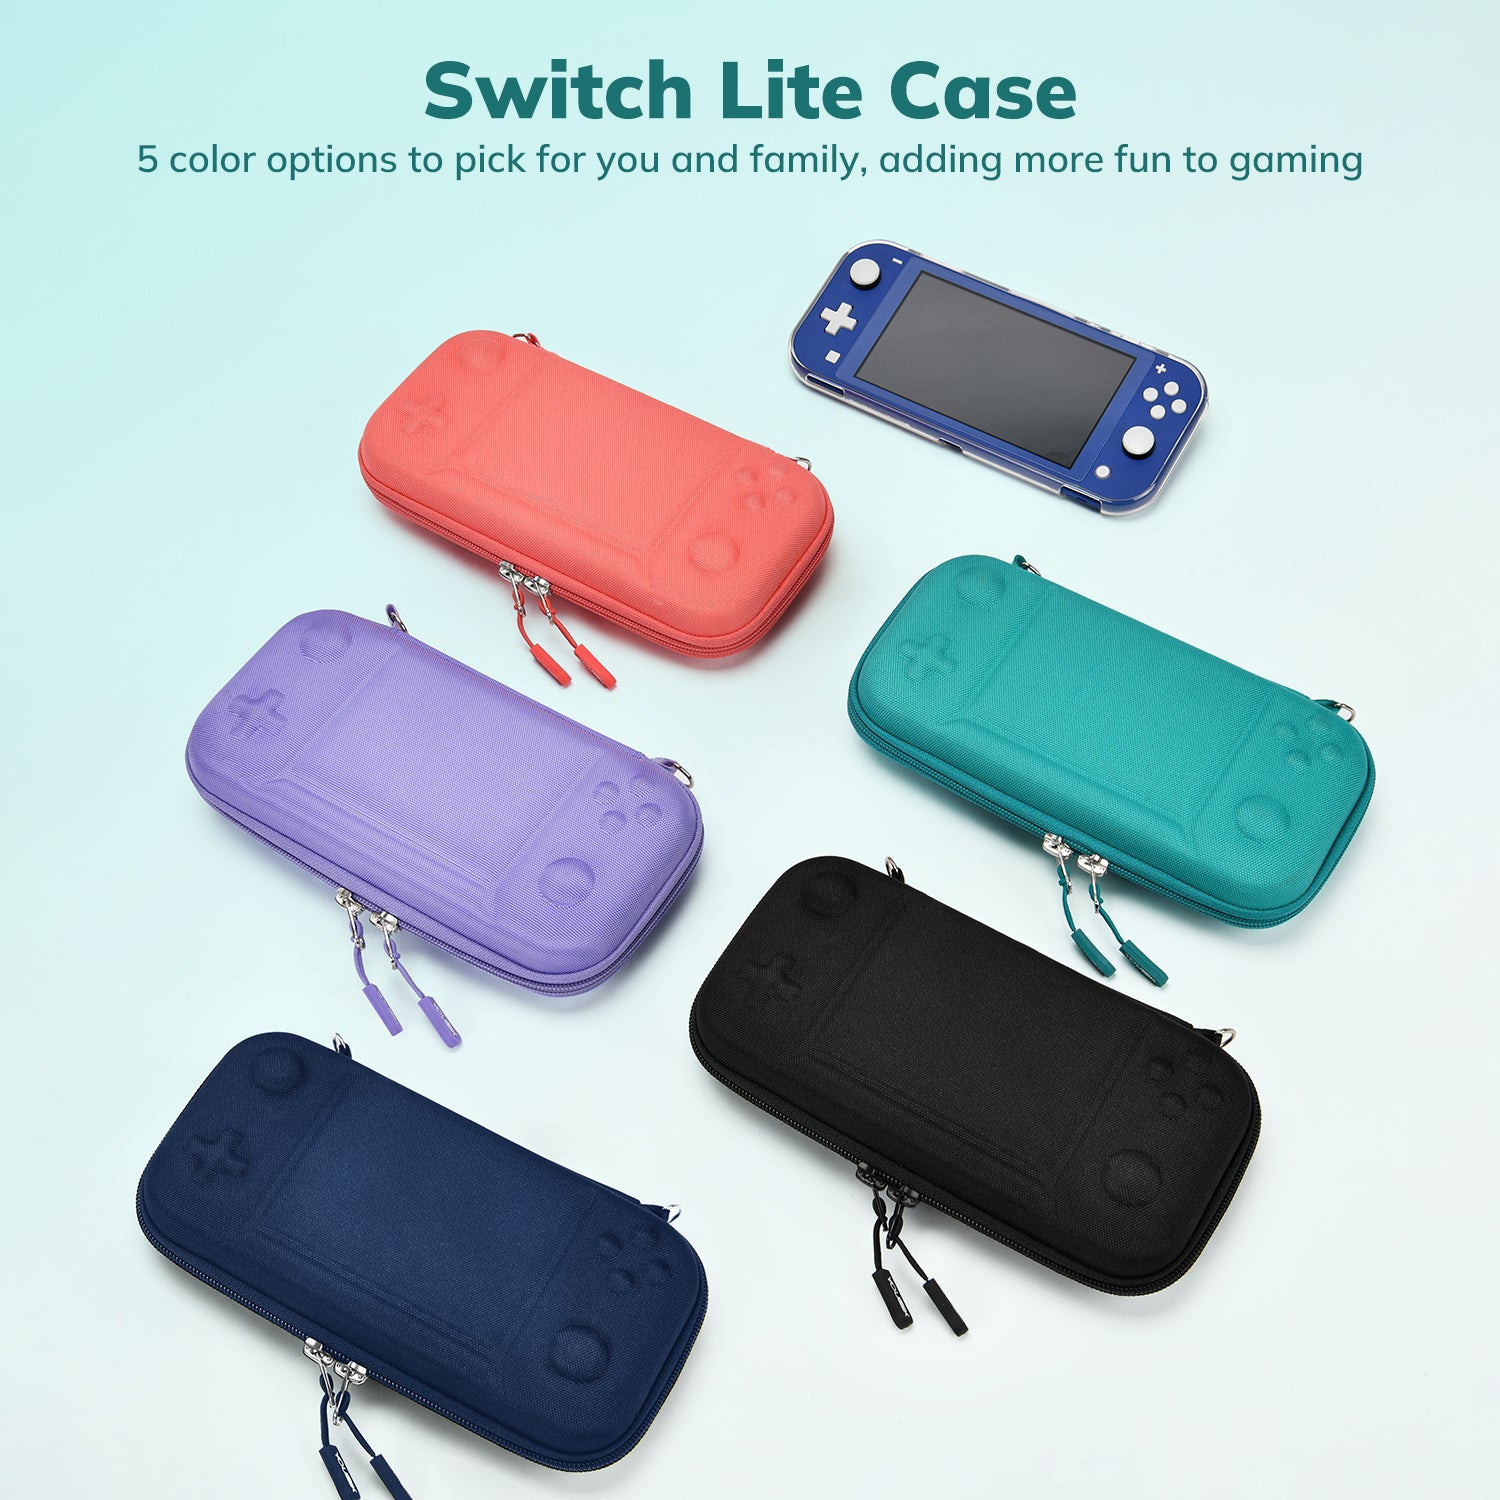 Younik Switch Lite Carry Case, Protective Case for Nintendo Switch Lite